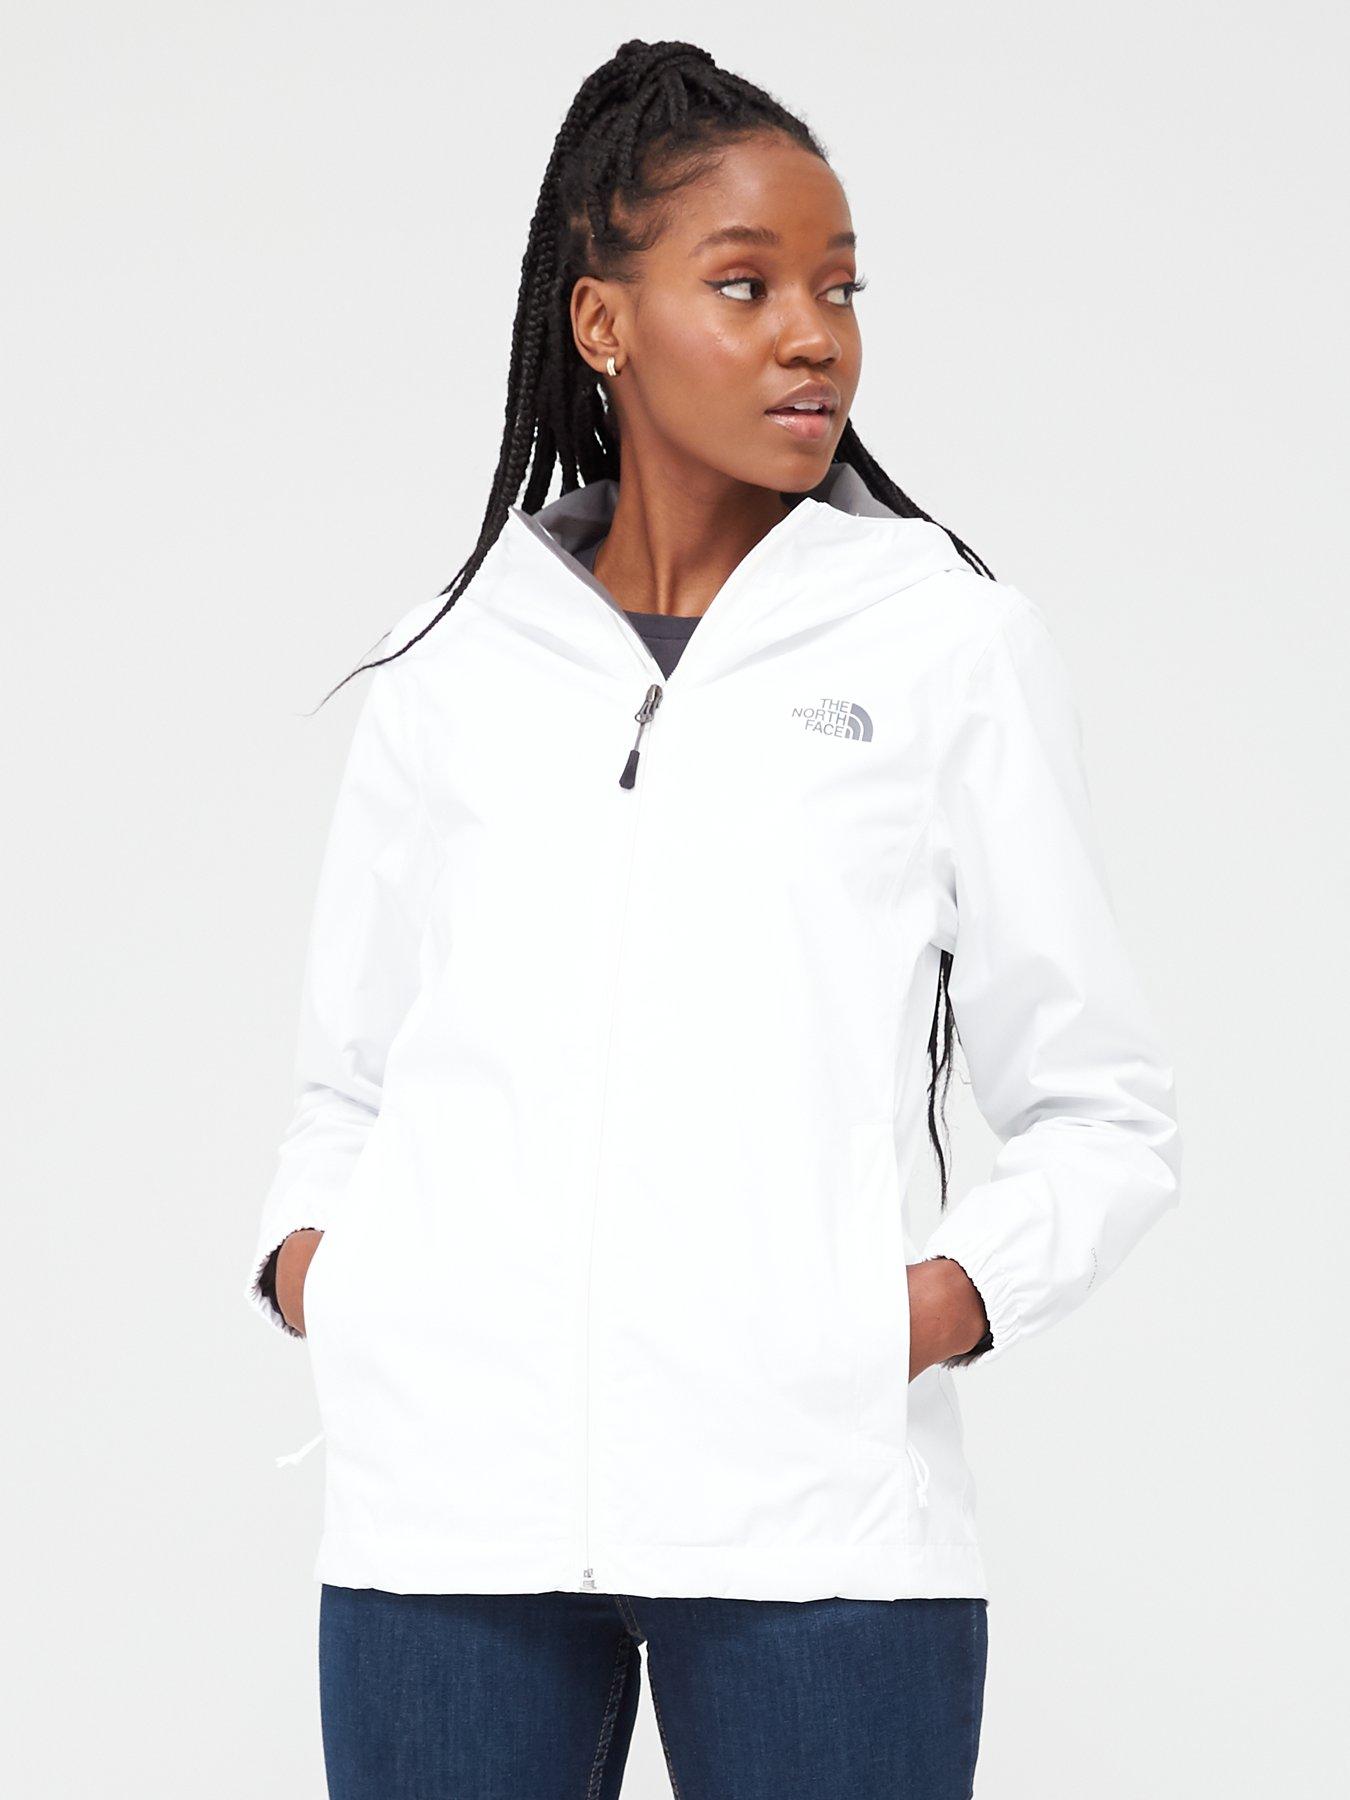 north face womens quest jacket